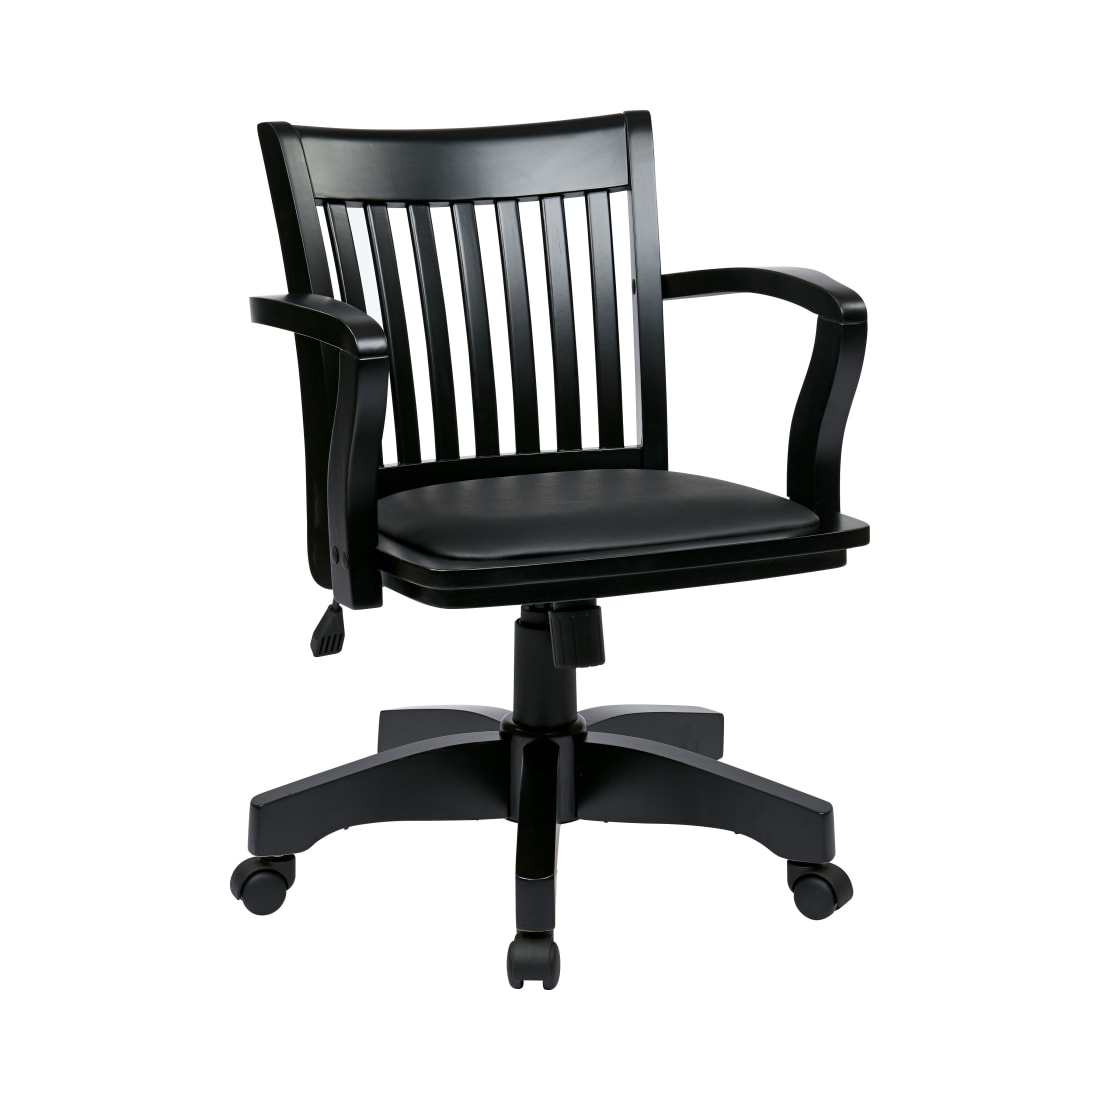 Deluxe Wood Bankers Chair with Vinyl Padded Seat in Black Finish and Black Vinyl Fabric